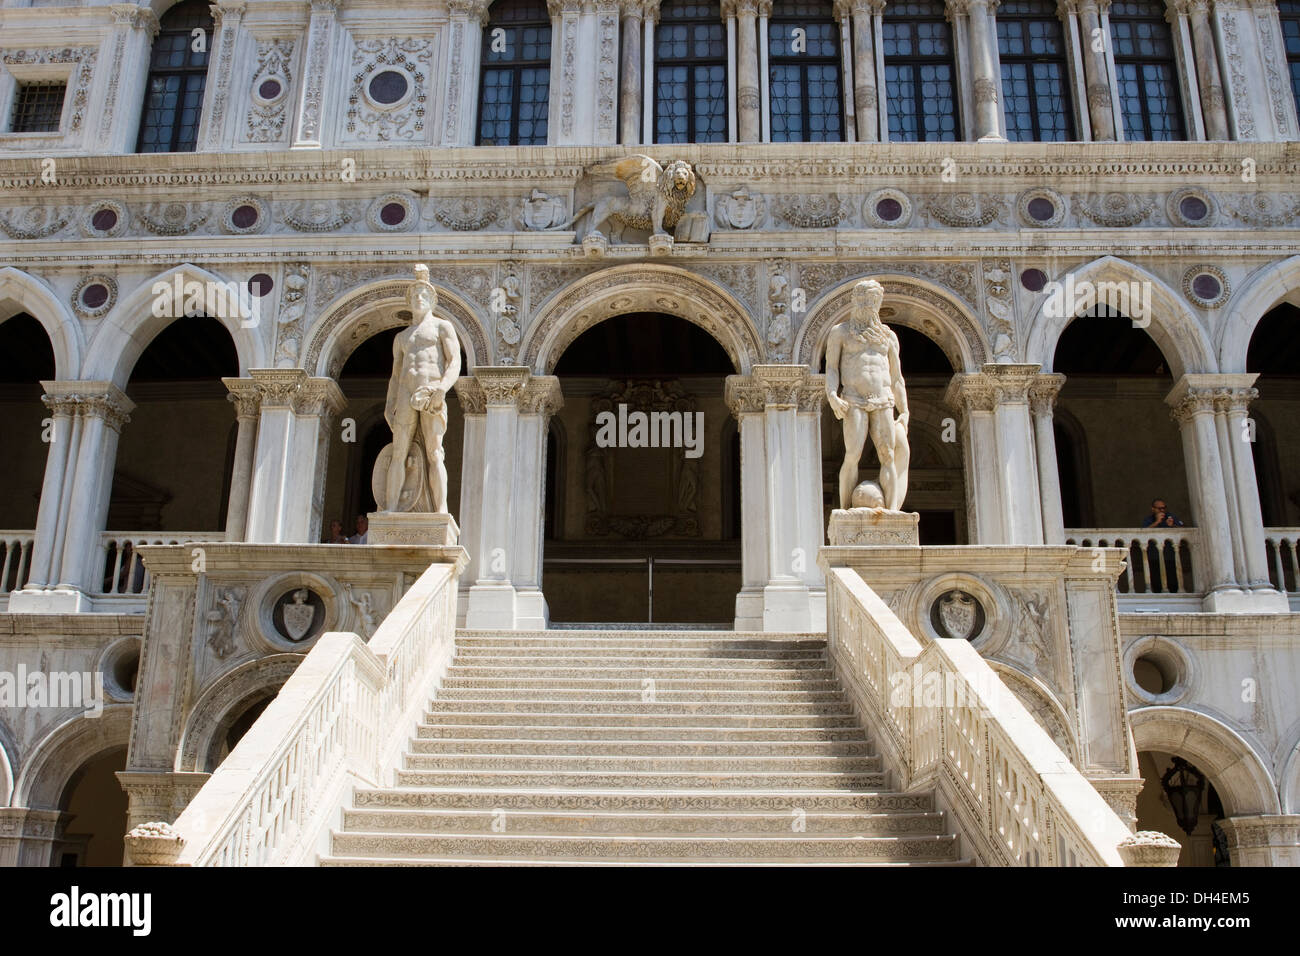 The Giant's Staircase in the Doge's Palace (Palazzo Ducale) in Venice, Italy. Stock Photo